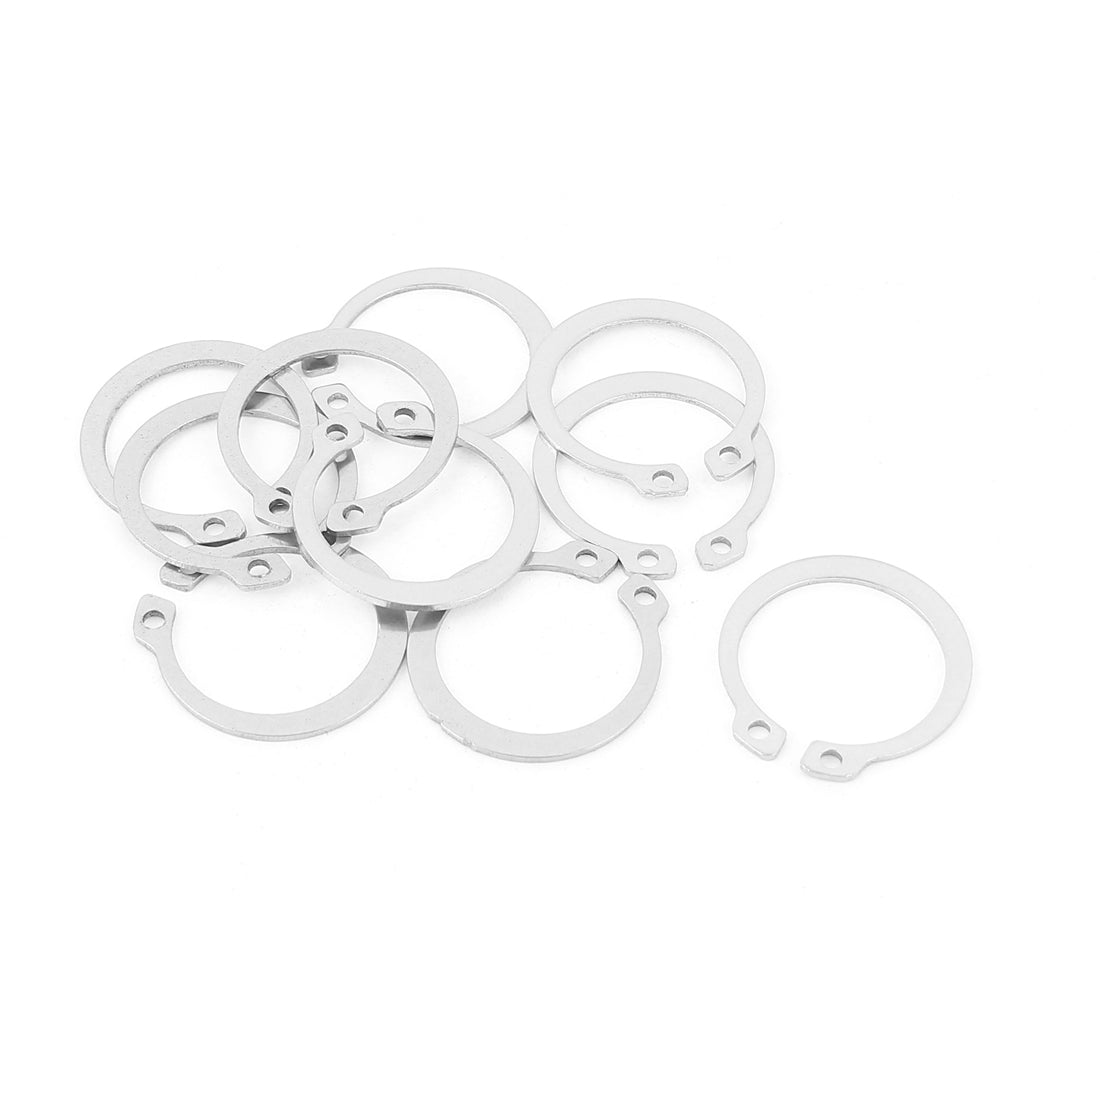 uxcell Uxcell 10pcs 304 Stainless Steel External Circlip Retaining Shaft Snap Rings 25mm